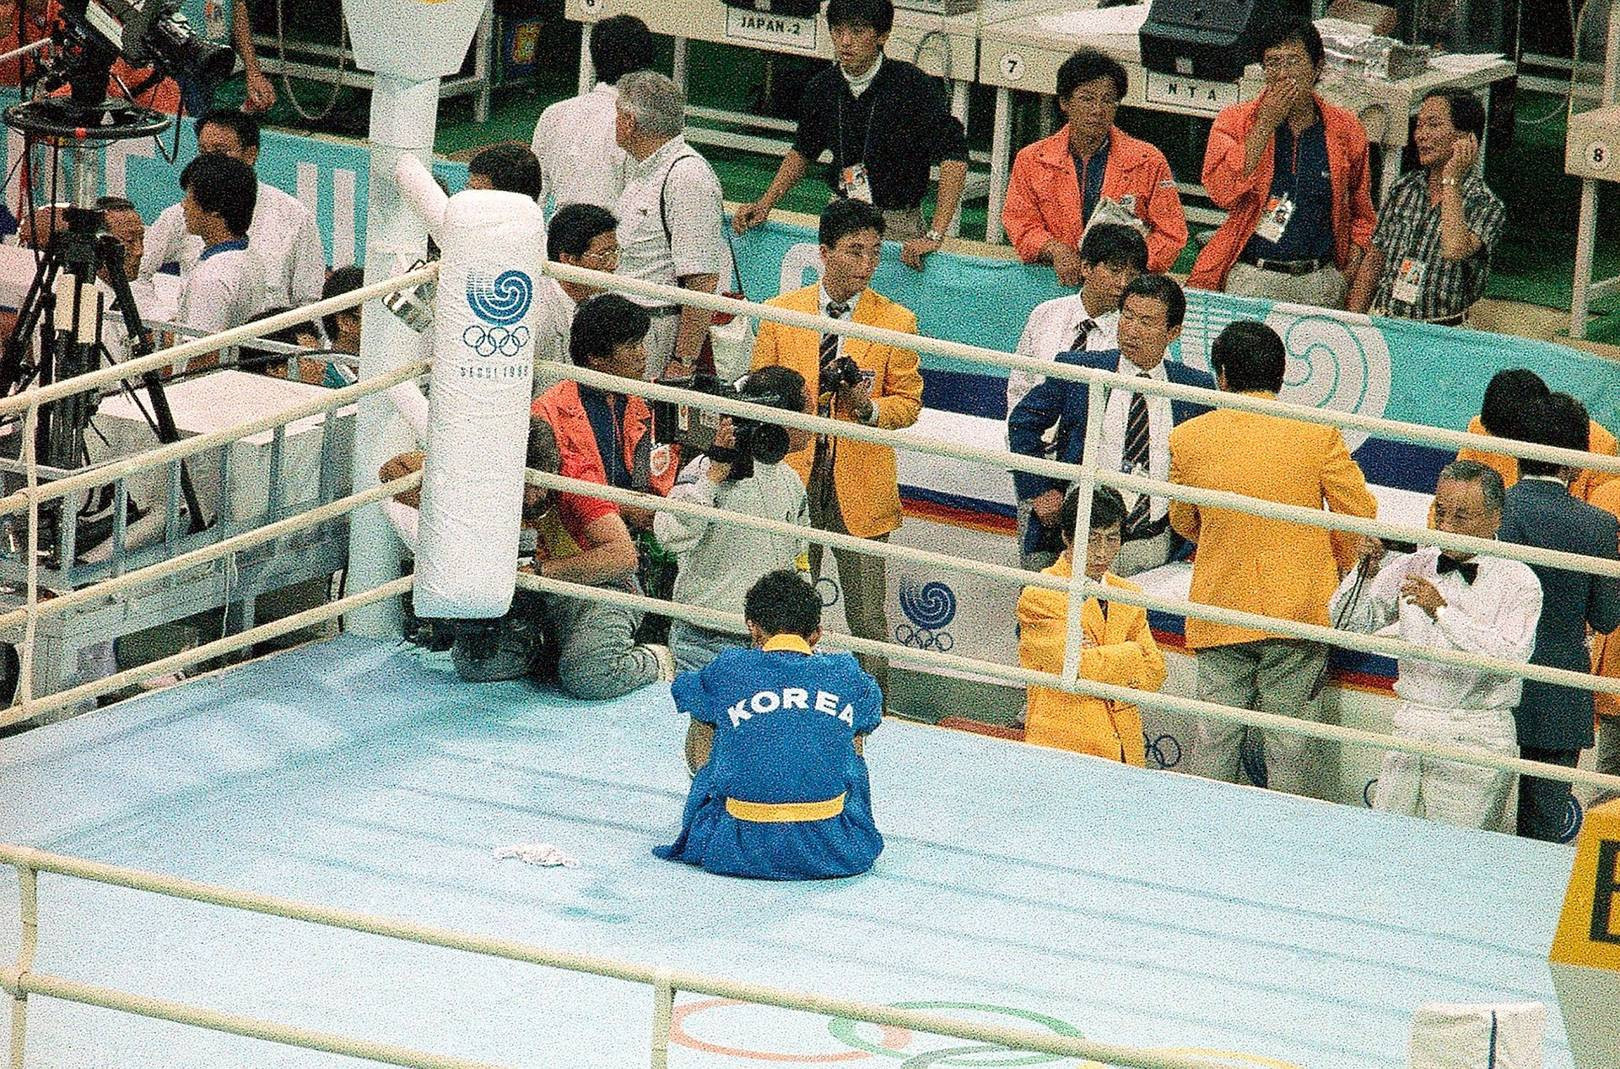 South Korean boxer Byeon Jeong-Il staged a sit-down protest in the ring after he was judged to have been beaten ©YouTube